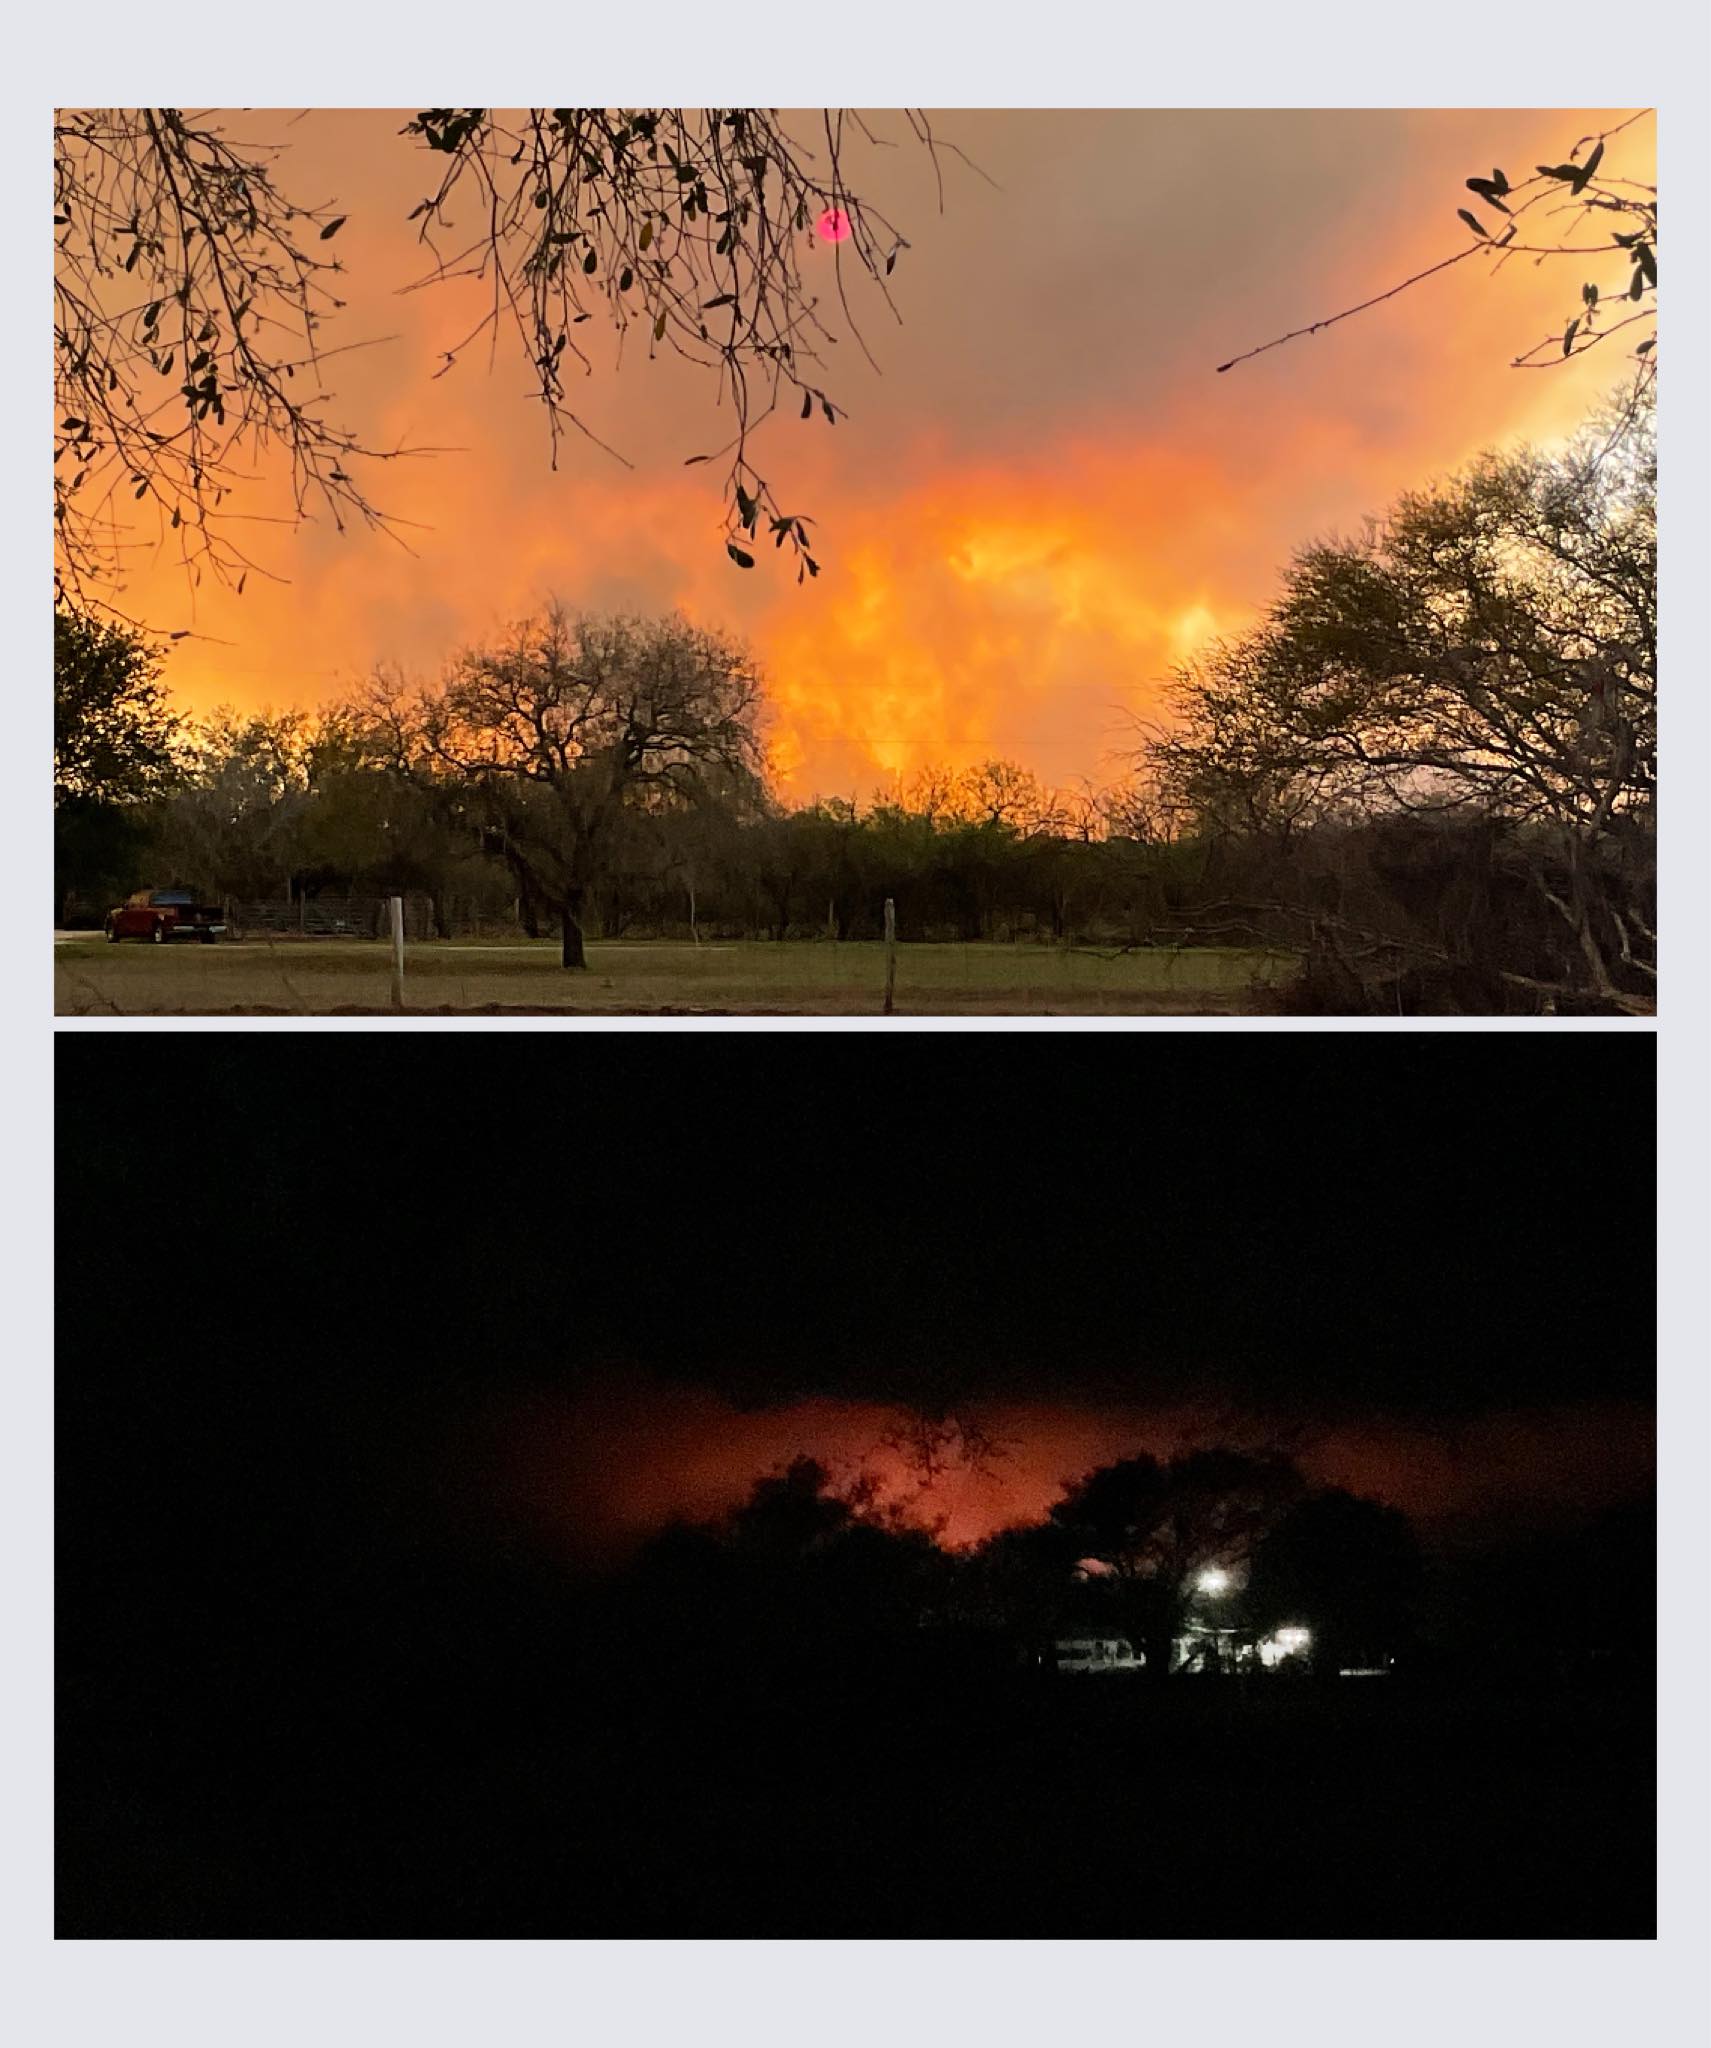 Photos courtesy of Kirsten Compary, Dean of Students. These photos show the Borrega Fire as it burned last night. Compary lives a few miles from the blaze.